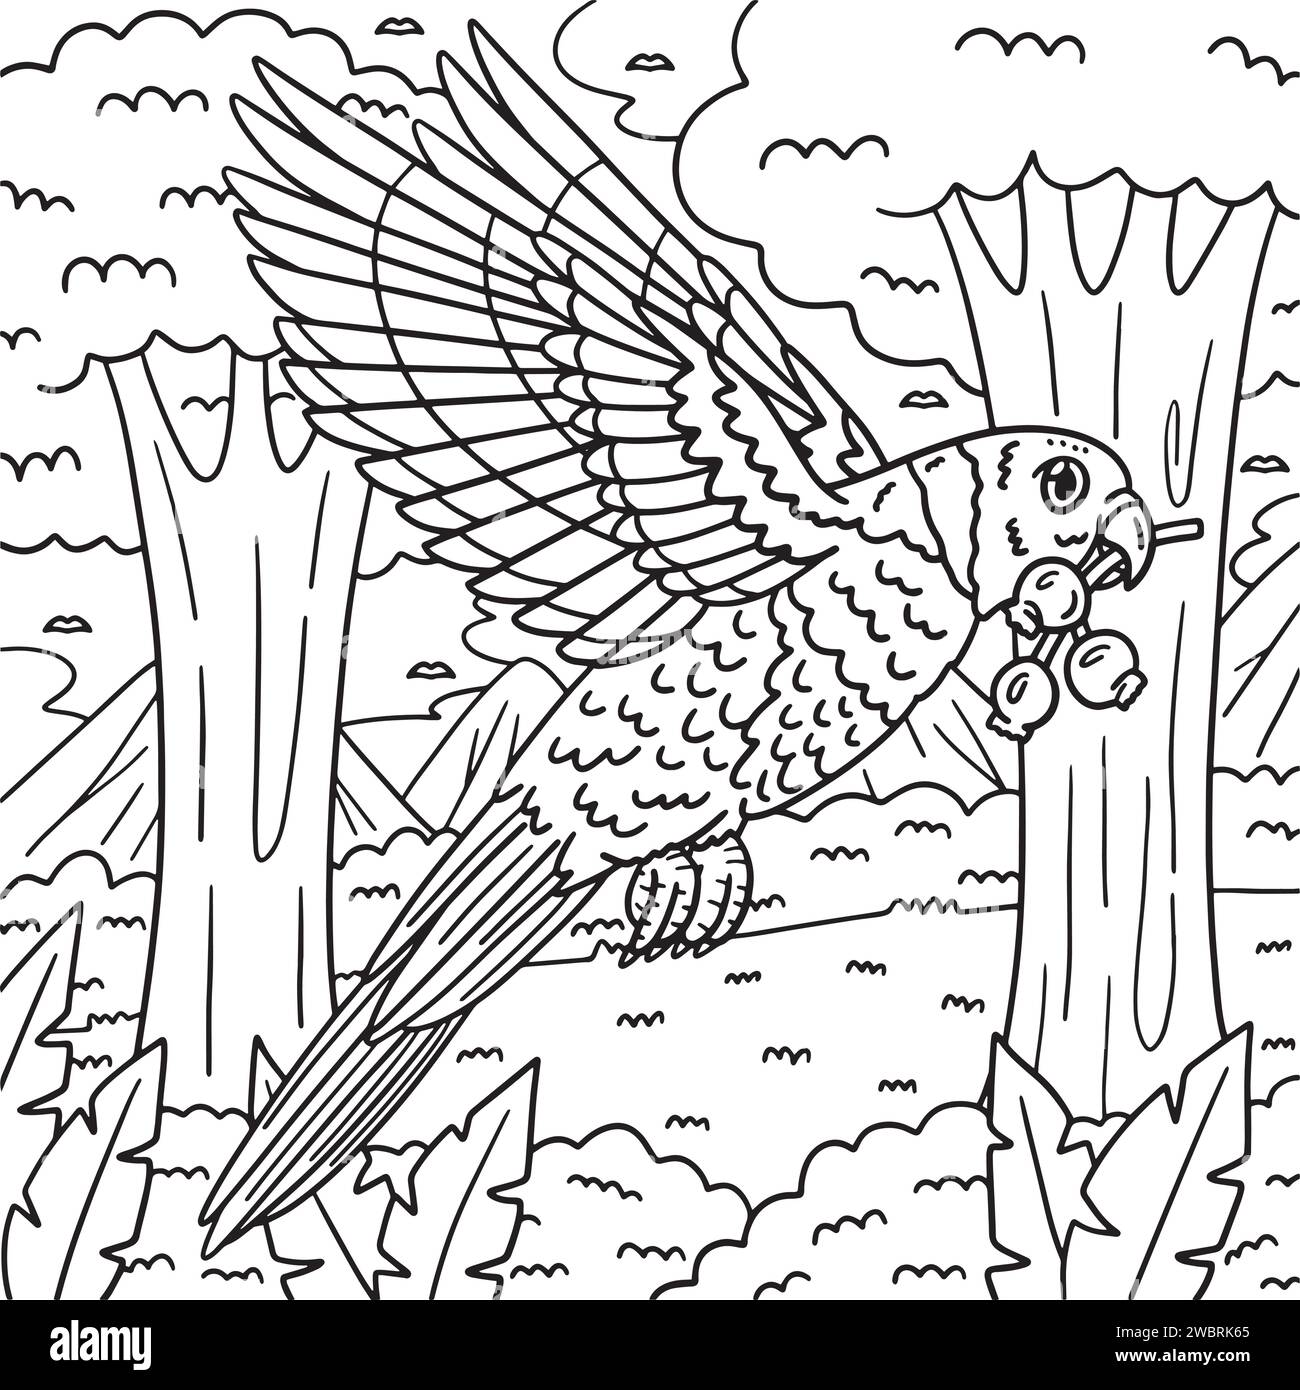 Loriini Bird Coloring Page for Kids Stock Vector